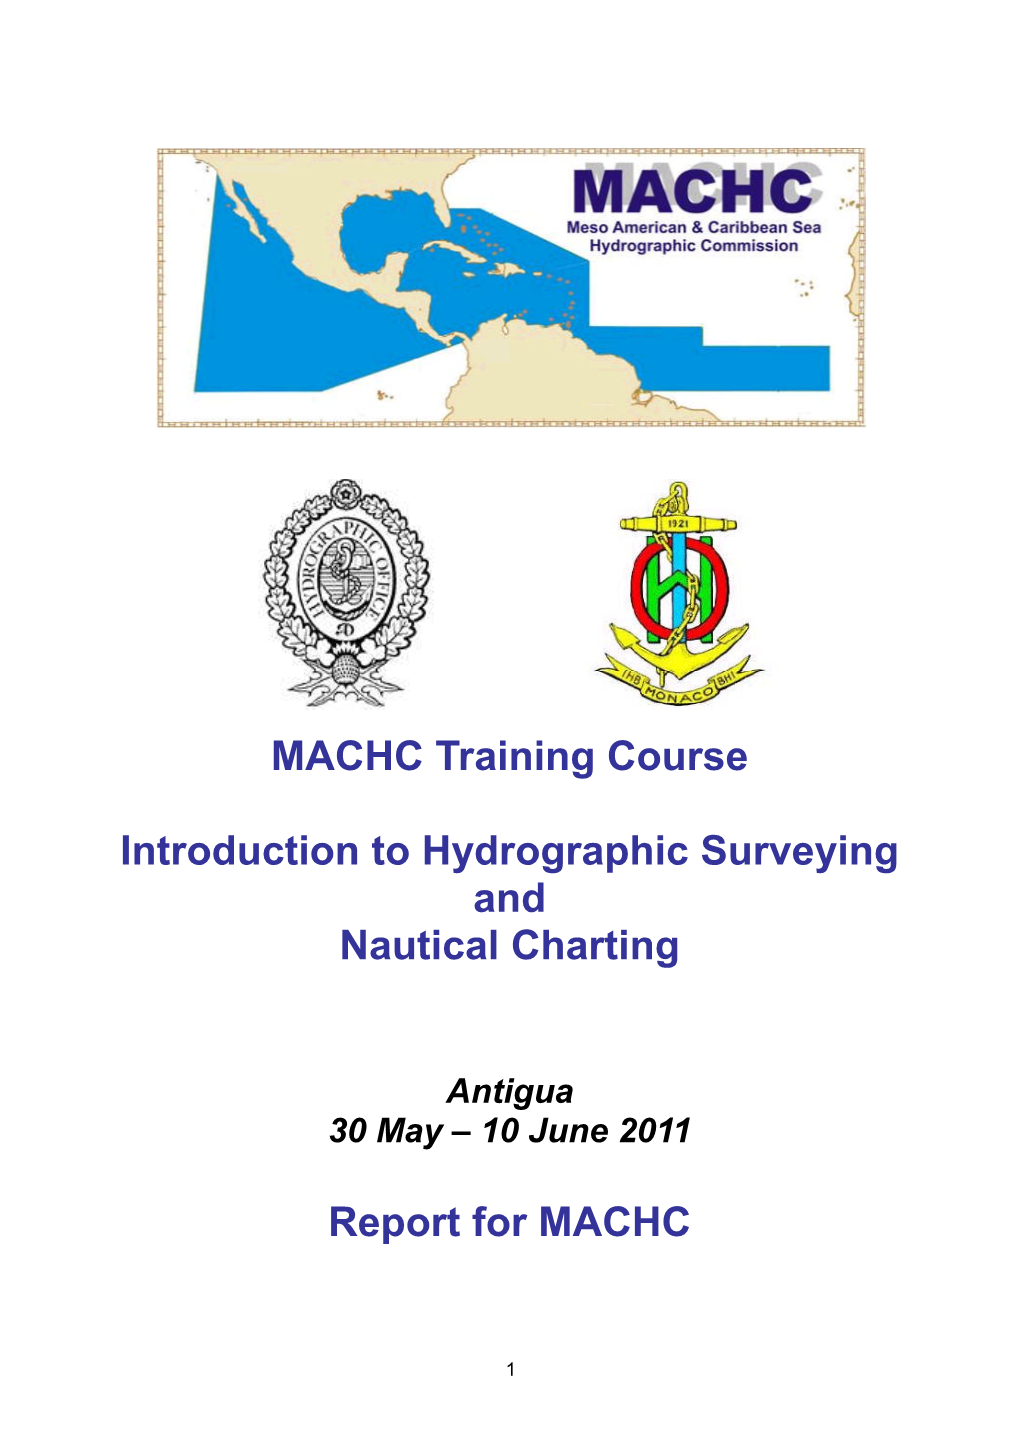 MACHC Training Course Introduction to Hydrographic Surveying And